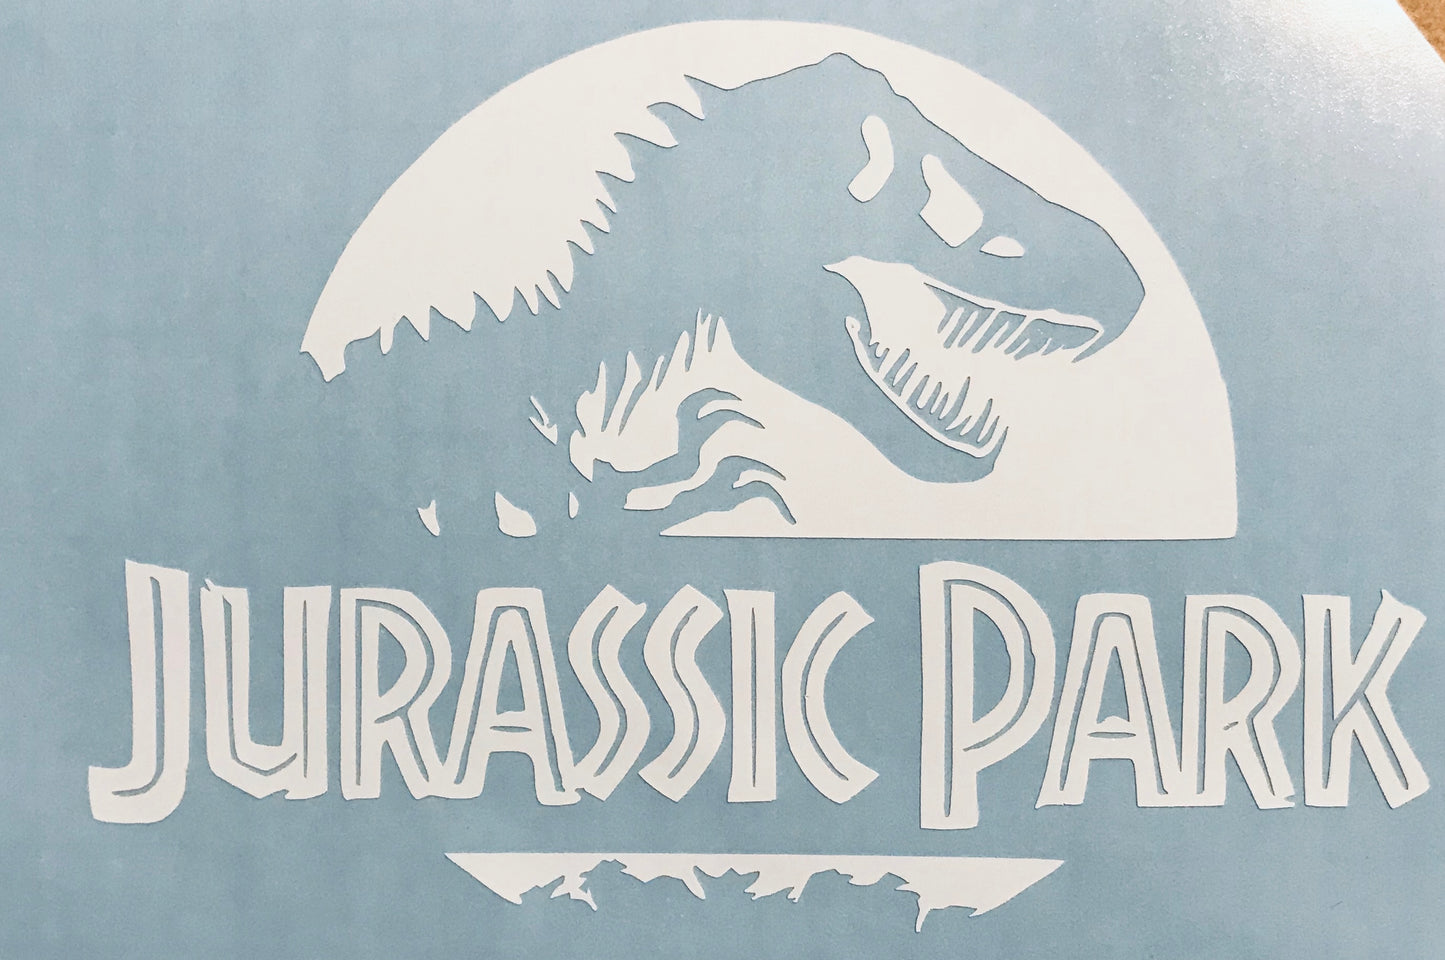 Welcome to Jurassic Park - car window decal